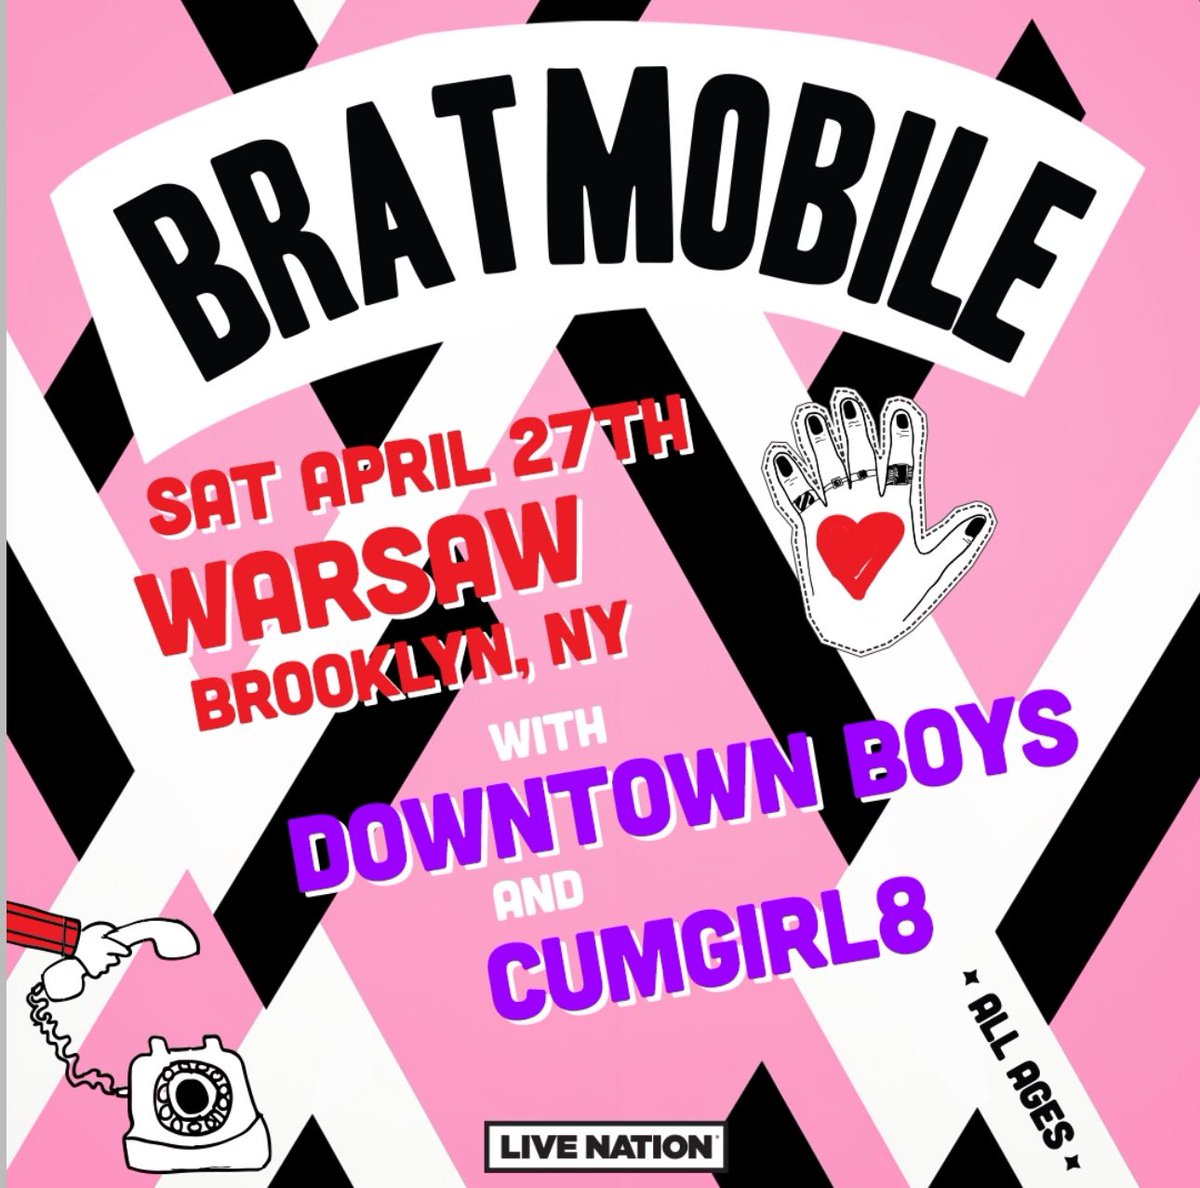 𝙏𝙊𝙉𝙄𝙂𝙃𝙏 💥 Riot grrrl greats Bratmobile are back in NYC for the first time in over 20 yrs with a #SoldOut show at Warsaw joined by special guests The Downtowwn Boys & Cumgirl8 ! ⏰ Doors: 7PM | Show: 8PM 📍261 Driggs Ave. Brooklyn, NY